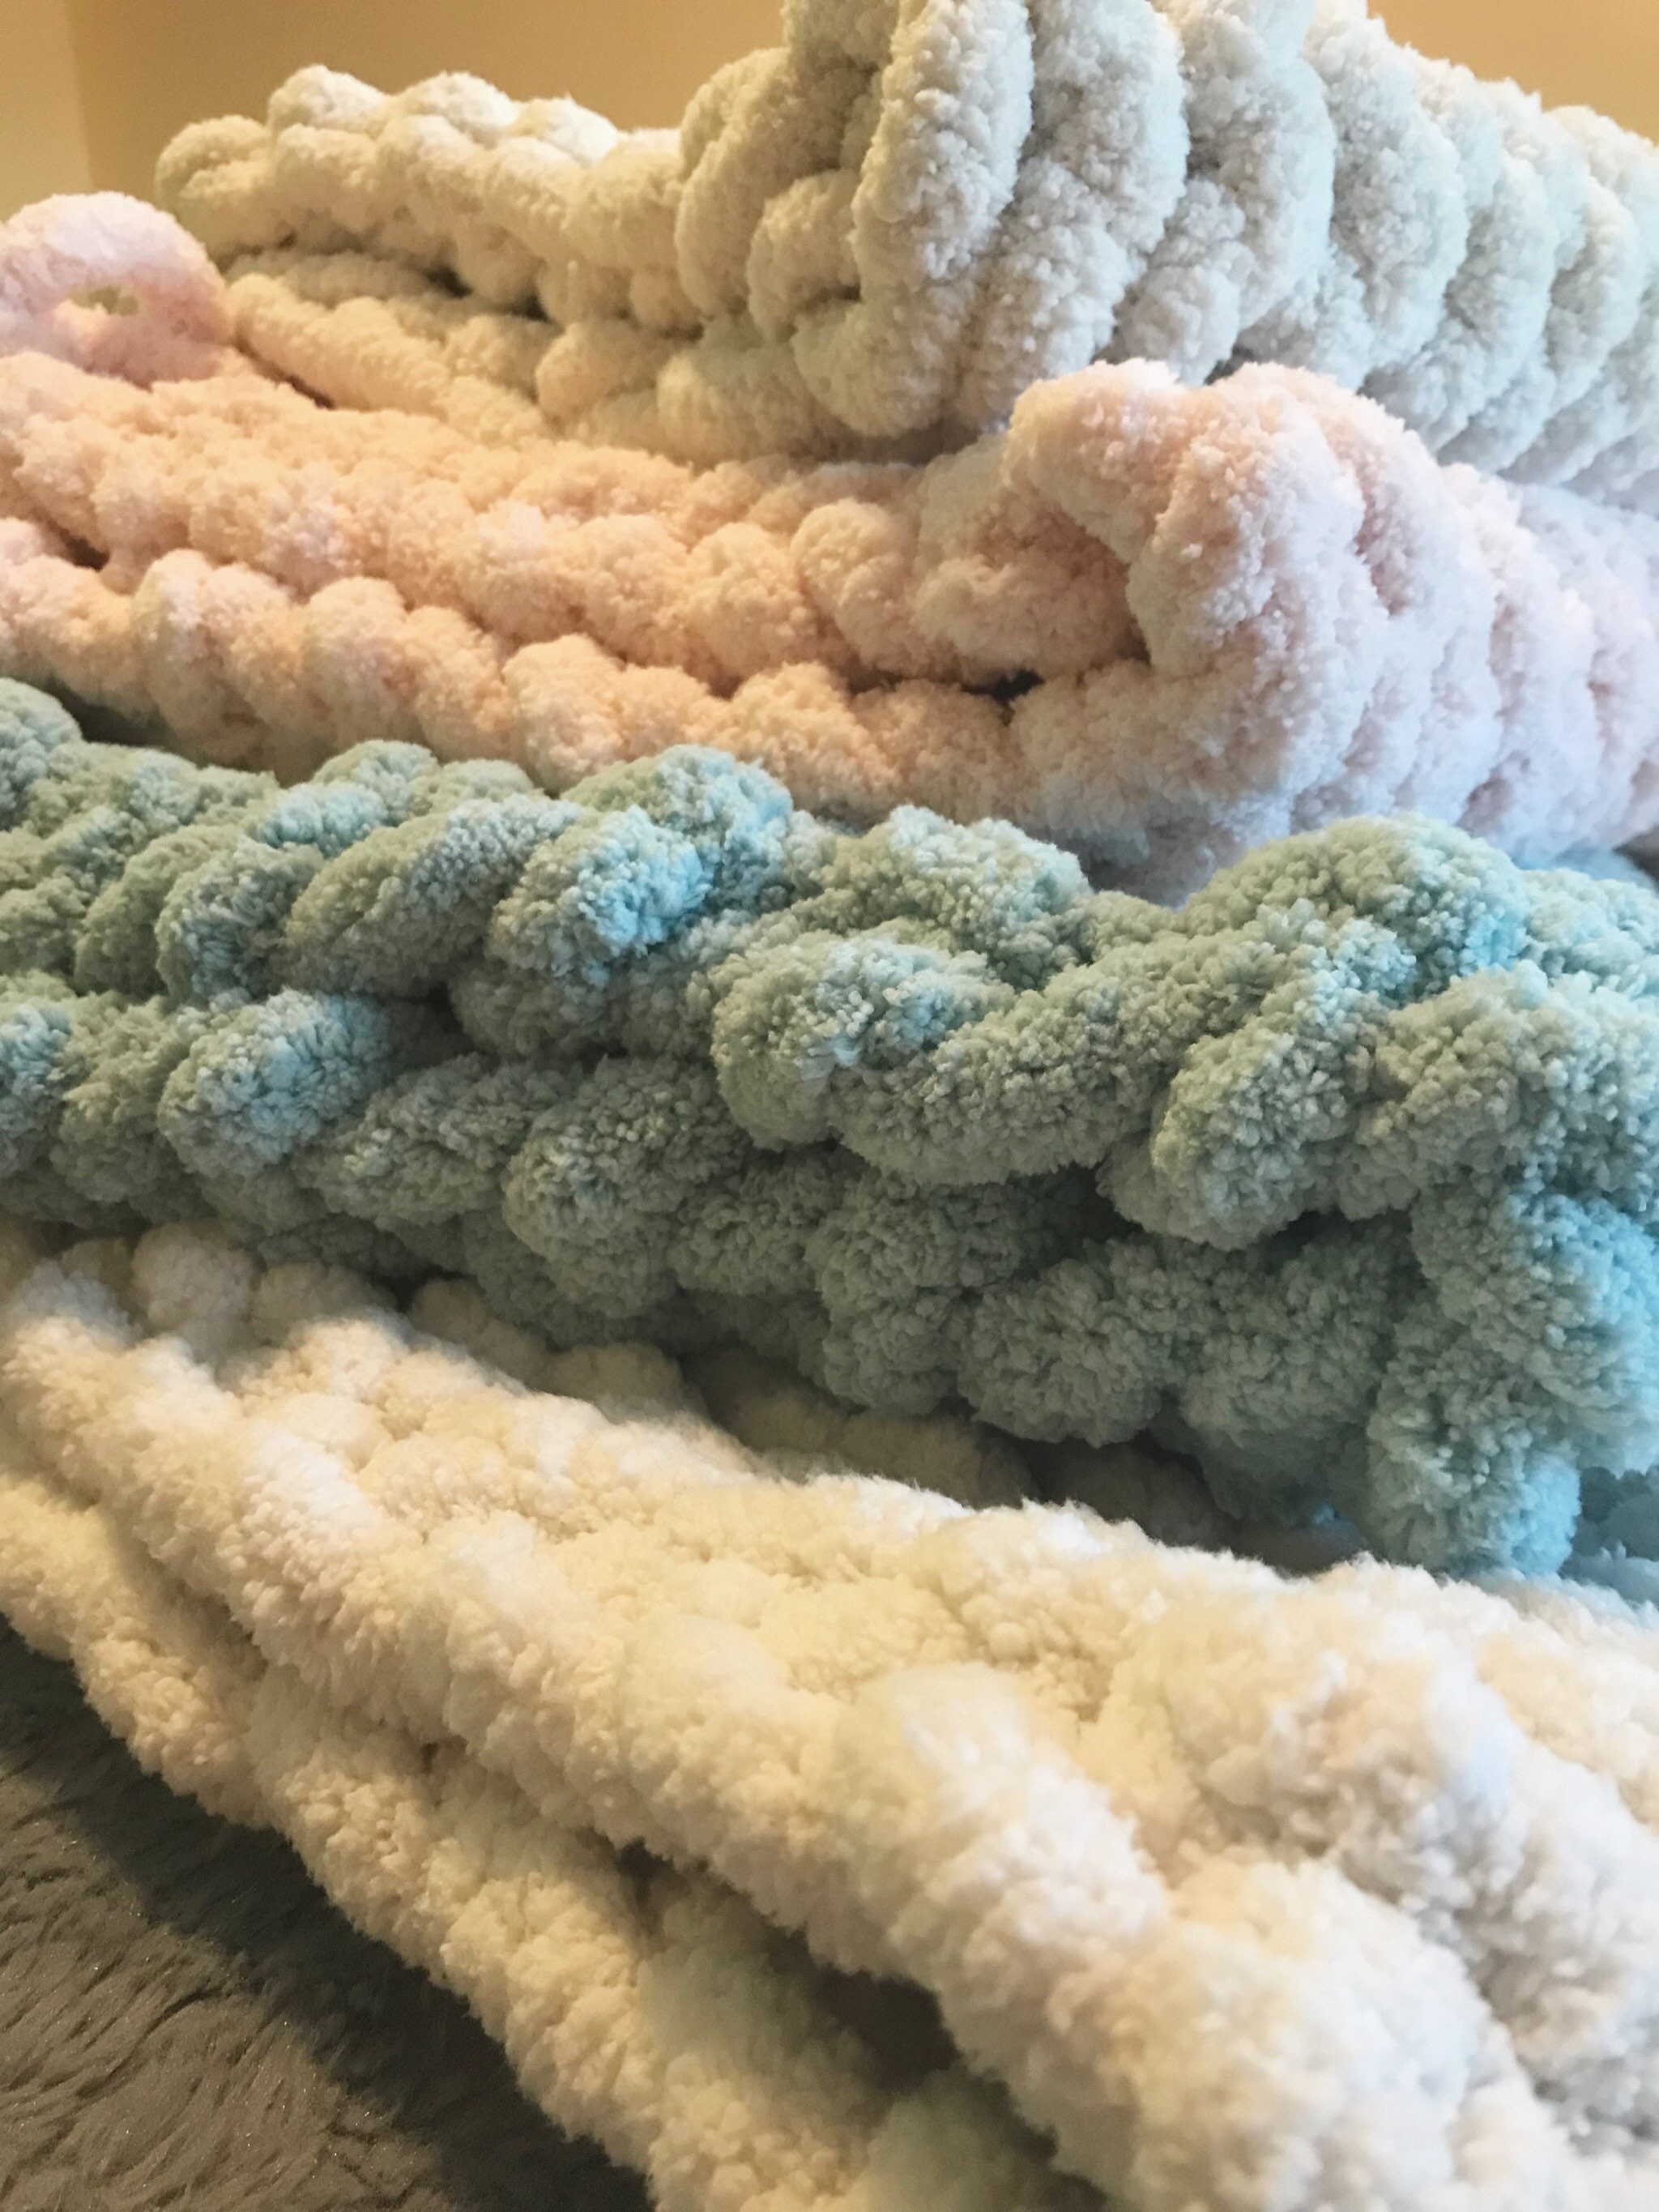 Fluffy Chenille Chunky Blanket Throw, Super Chunky Knitted Blanket, Arm Knit  Blanket Made With Chenille Yarn, Chenille Blanket, Bedspread 